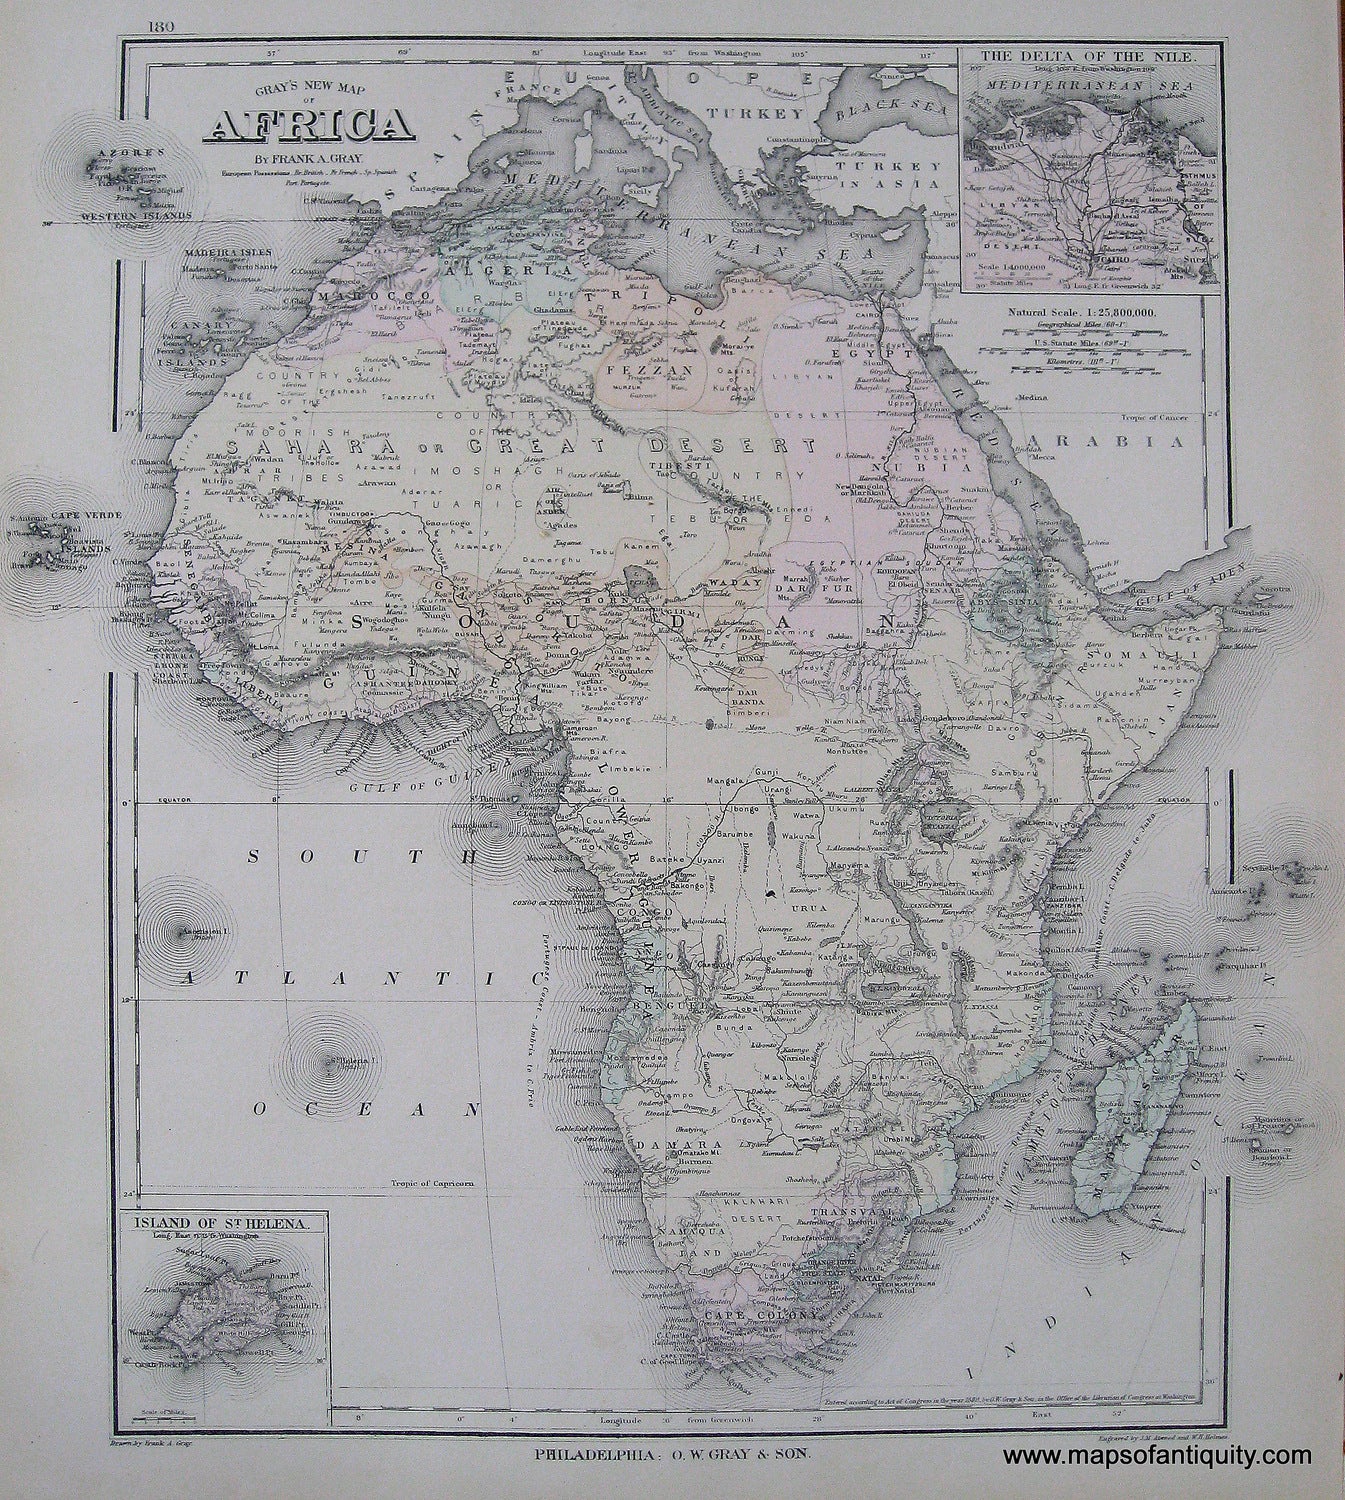 Antique-Hand-Colored-Map-Gray's-New-Map-of-Africa-******-Africa-Africa-General-1881-Gray-Maps-Of-Antiquity